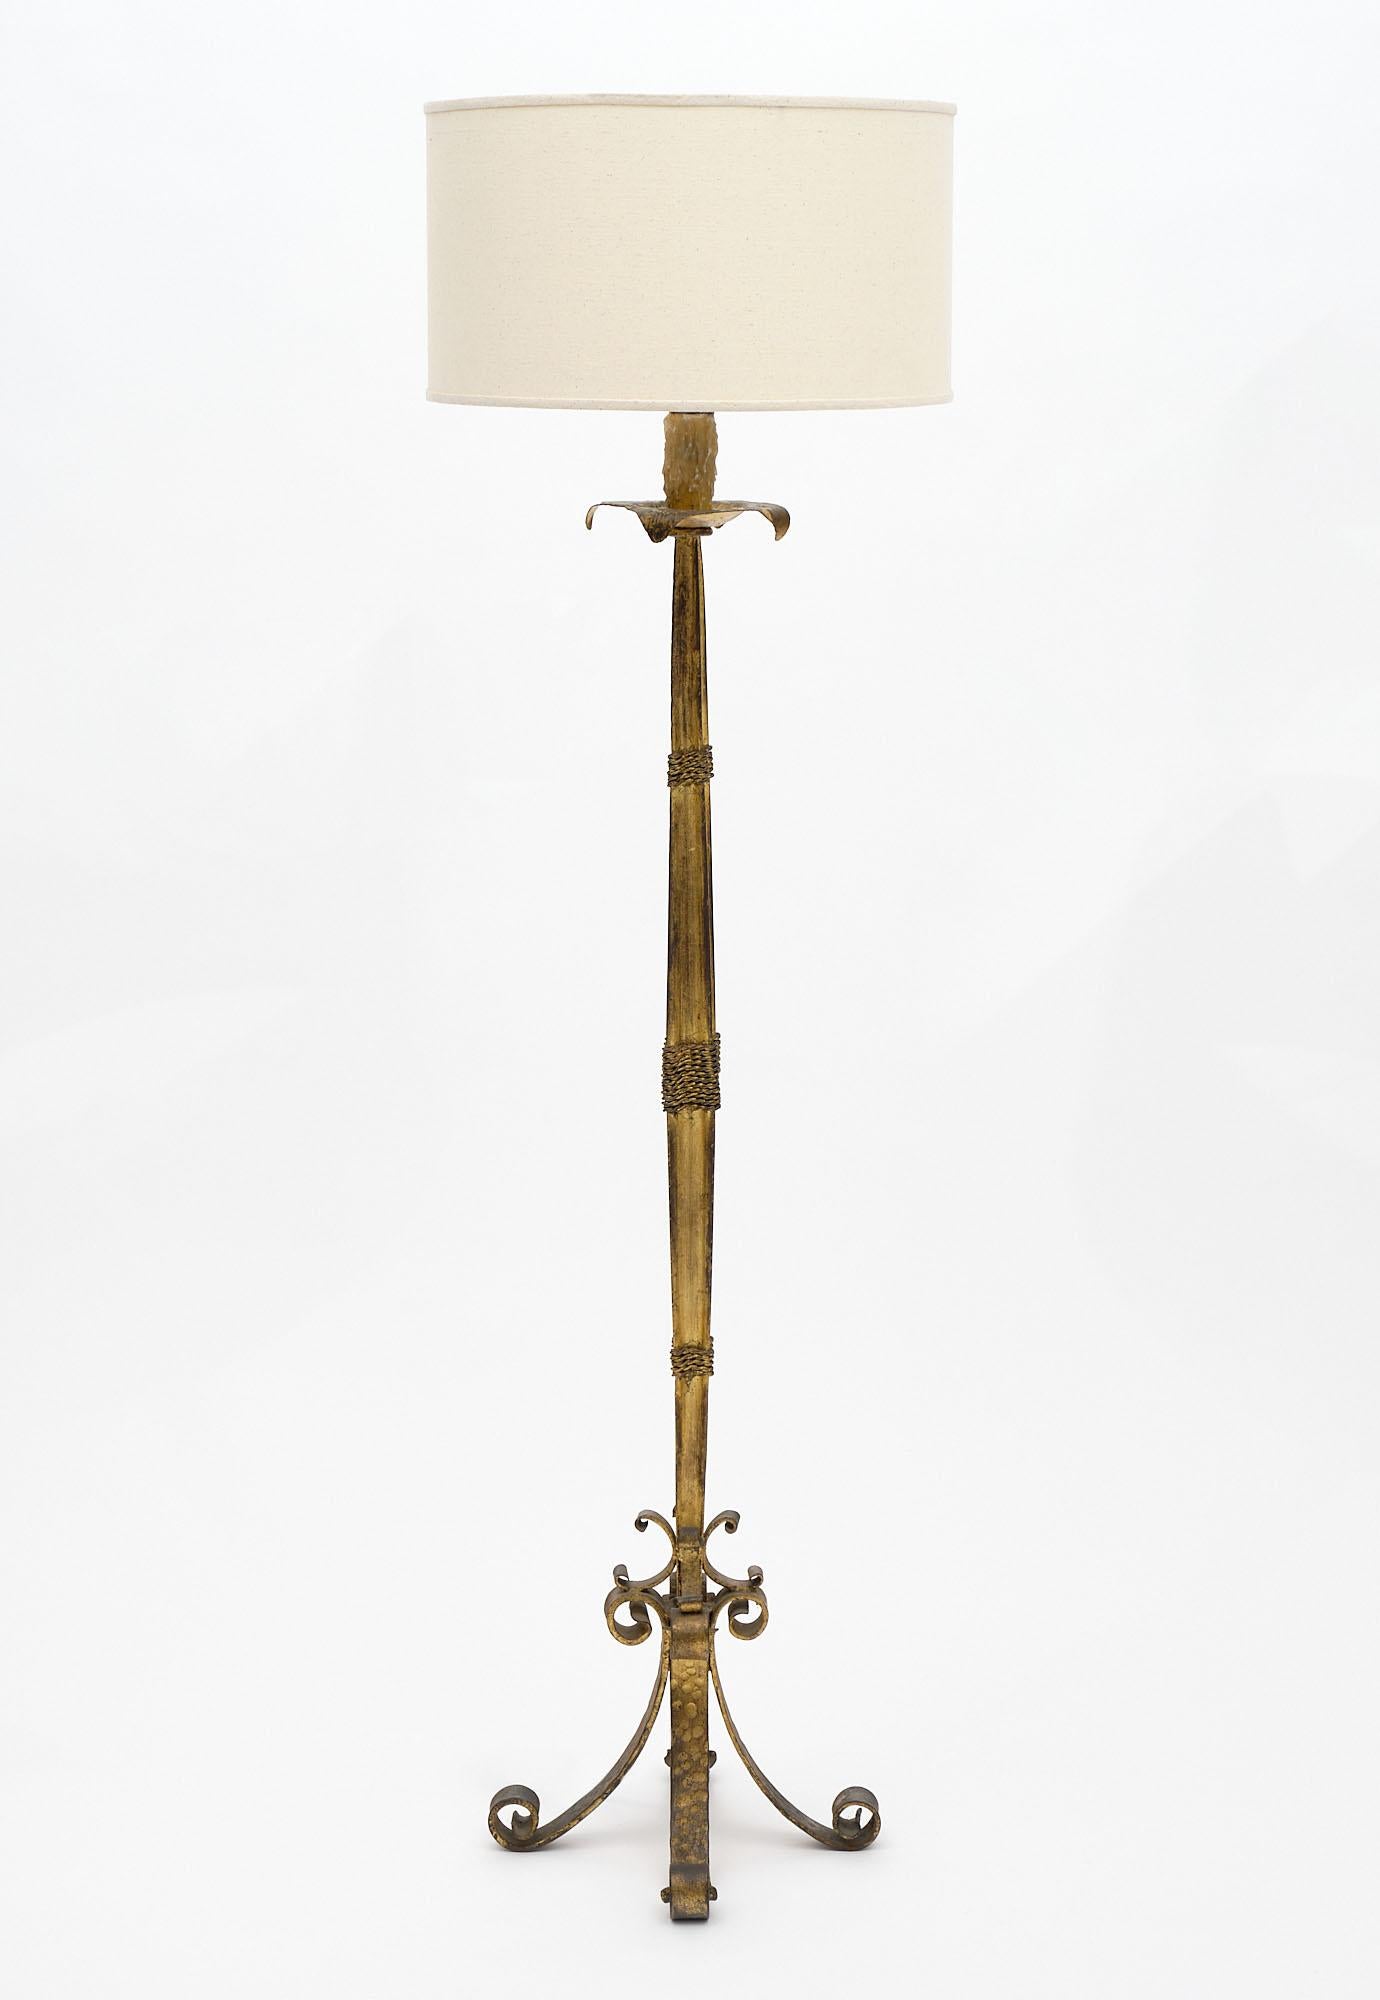 A wonderful Spanish floor lamp; circa 1930. Made of gold leafed; forged iron and rewired for the United States. In excellent condition.